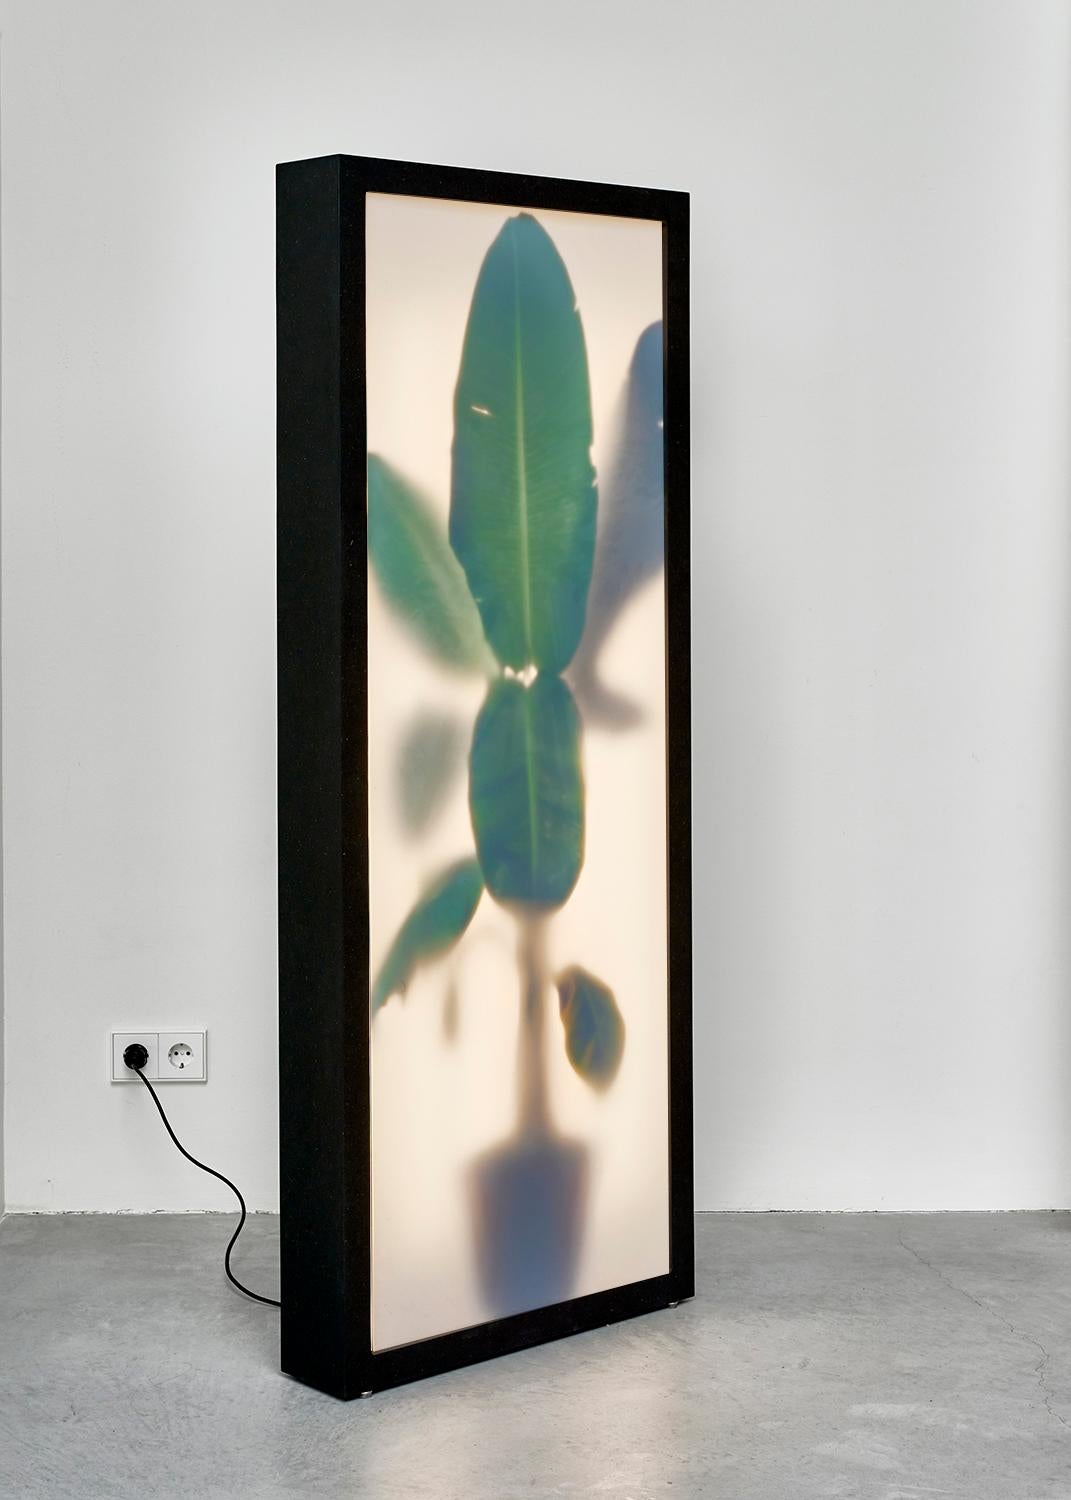 A three-dimensional, layered depiction of a banana plant is placed into a light box. When the light shines through the thin green leaves, the representation becomes hyper realistic. The plant leaves the suggestion of being alive, trapped behind